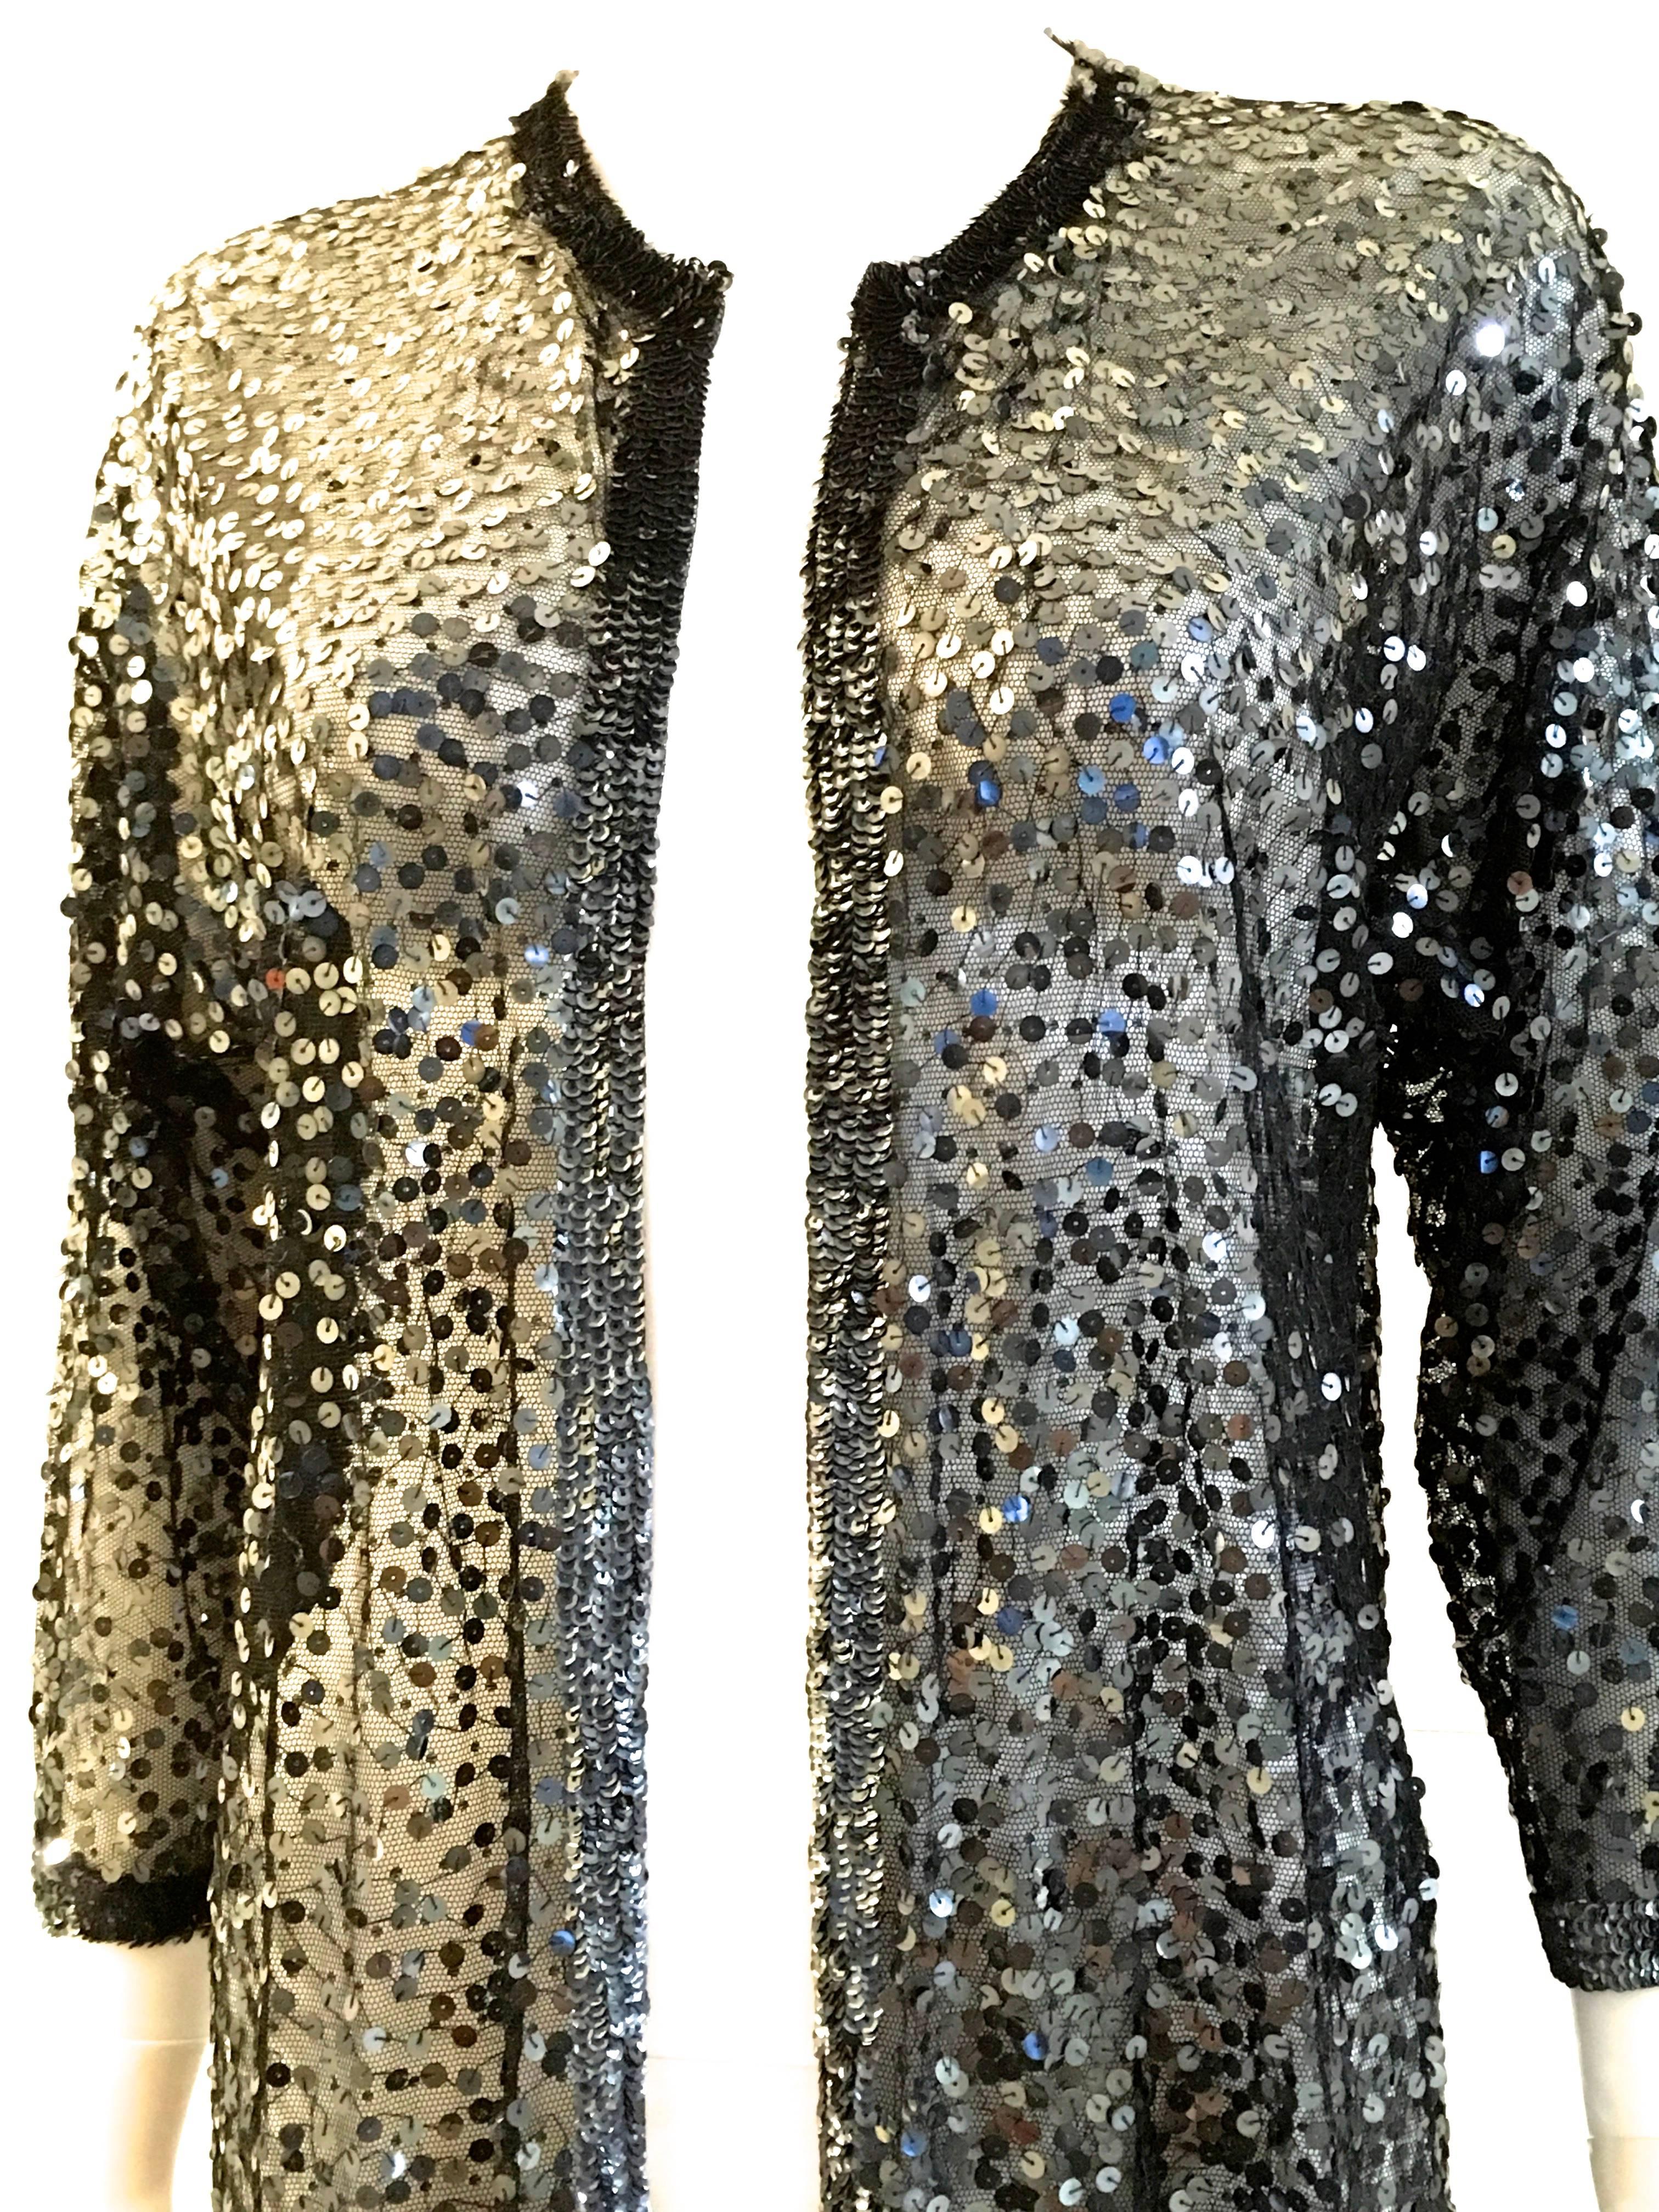 Presented here is a beautiful sequined jacket by Zoran. As with most Zoran, it is usually a one size fits all because it is completely opened on the front. It fits anyone from a size 0 to a size 10 depending on how loose or tight you want to wear